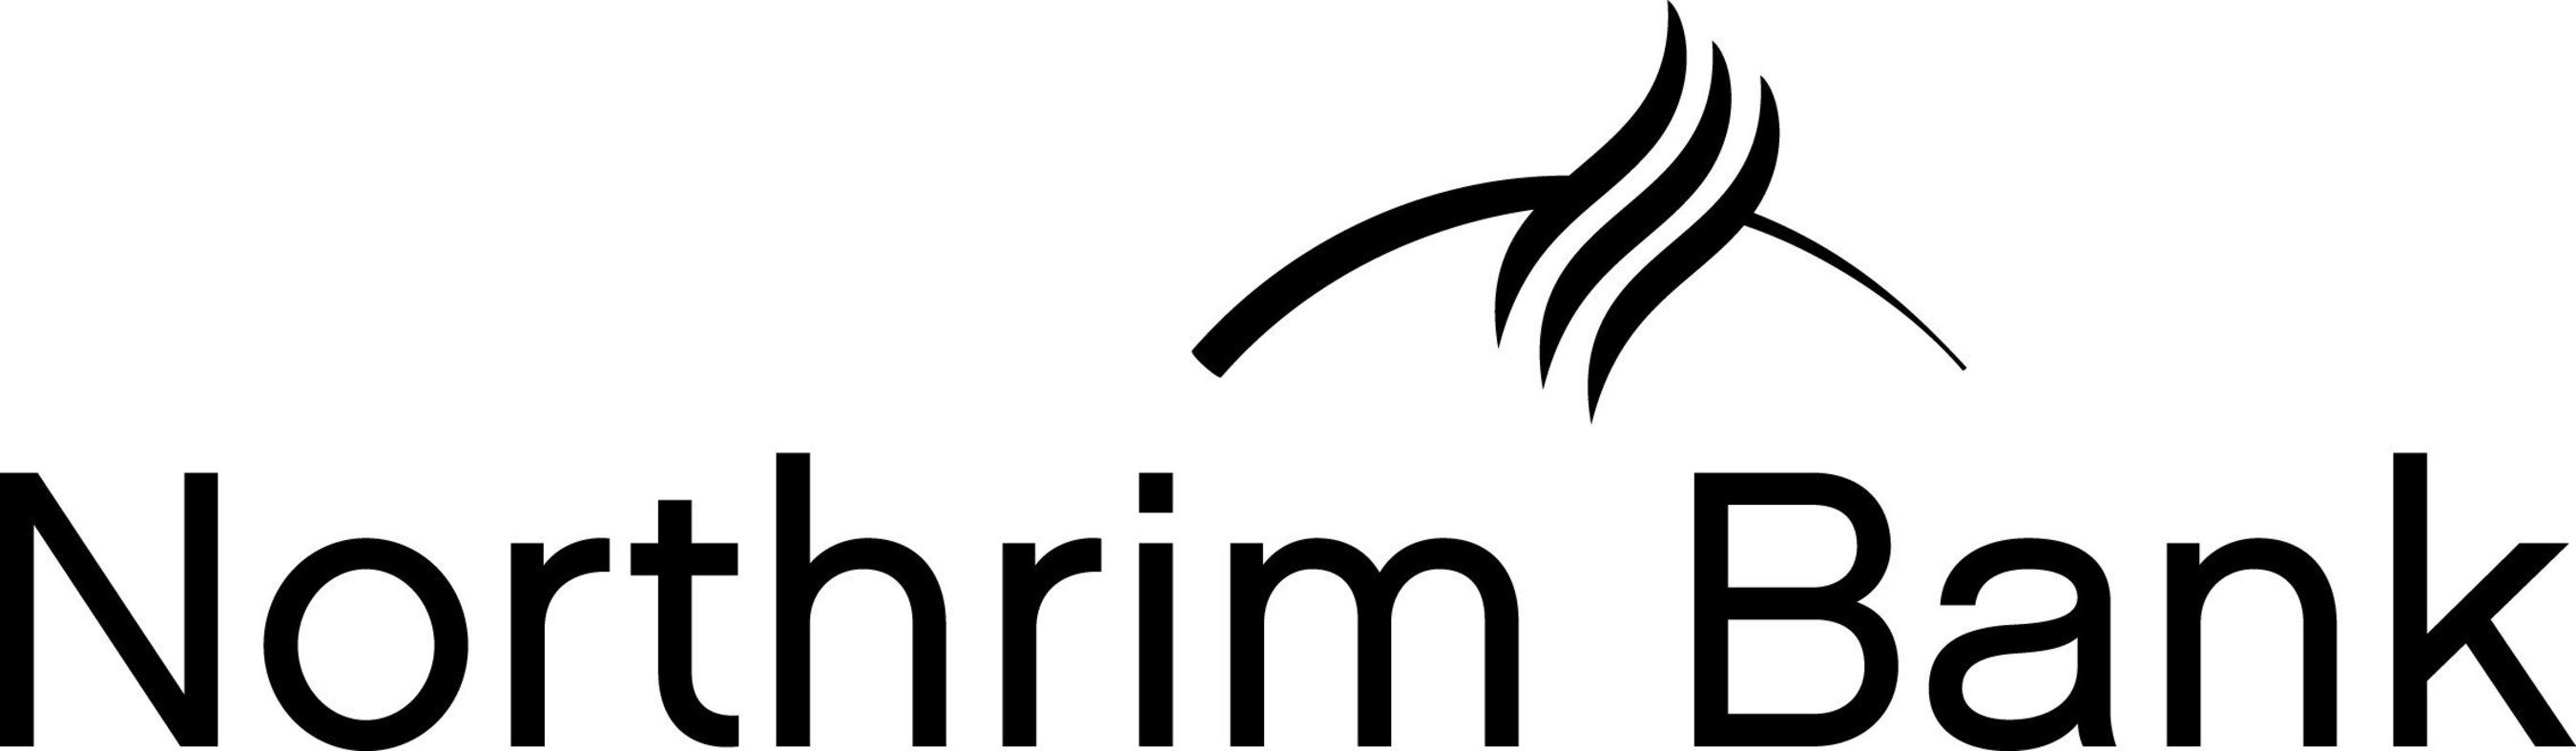 Northrim Bank is one of three publicly traded/publicly held companies based in Alaska. Founded in 1990, Northrim was built on the ideal of Customer First Service and has remained committed to providing the highest quality of service and value to businesses, professionals, and individual Alaskans.